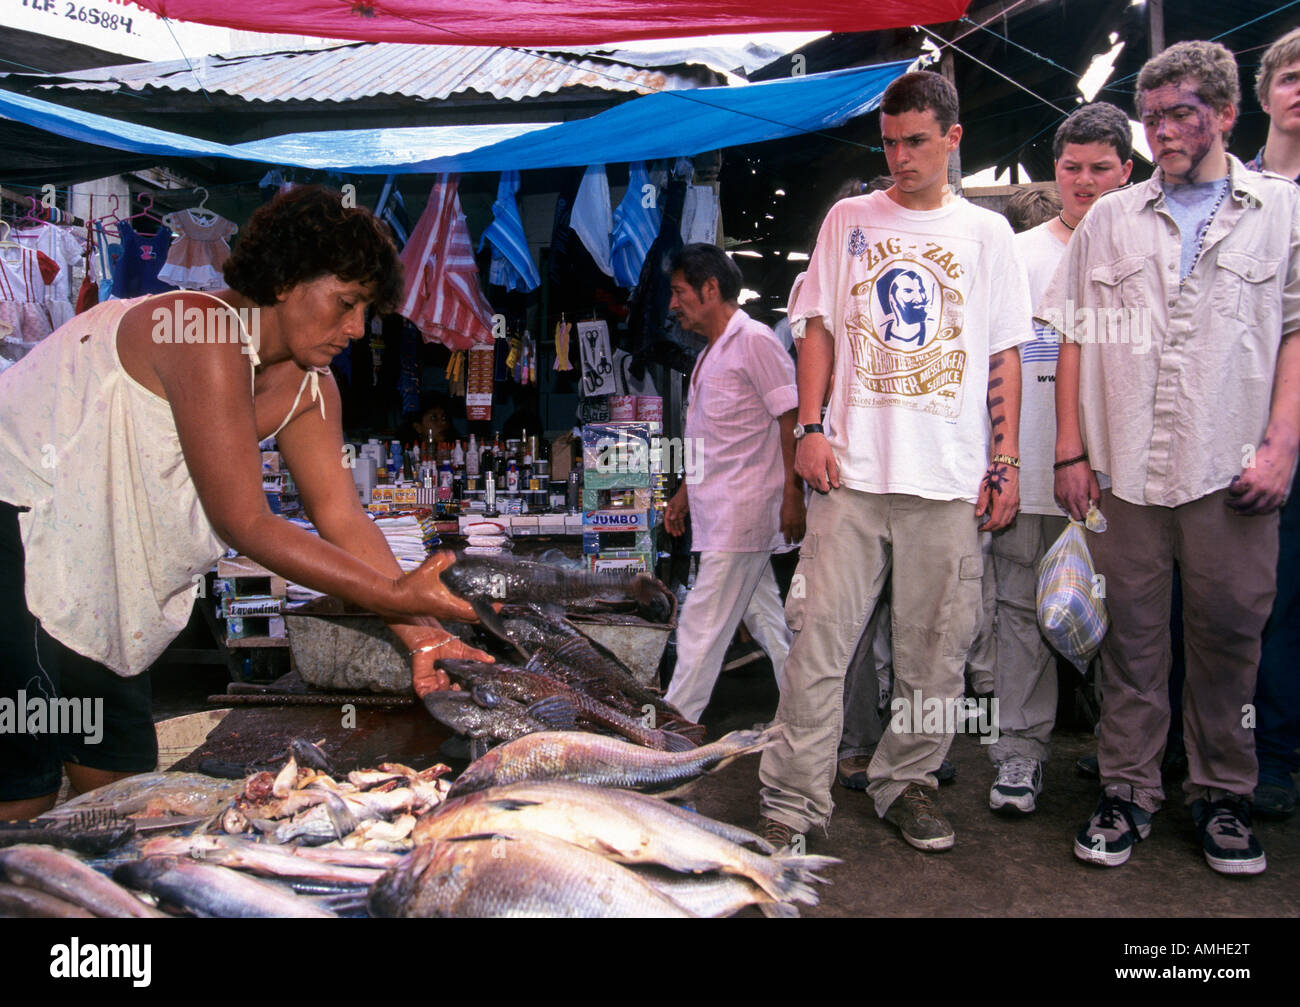 American high school students visit Iquitos market in Peru. Stock Photo